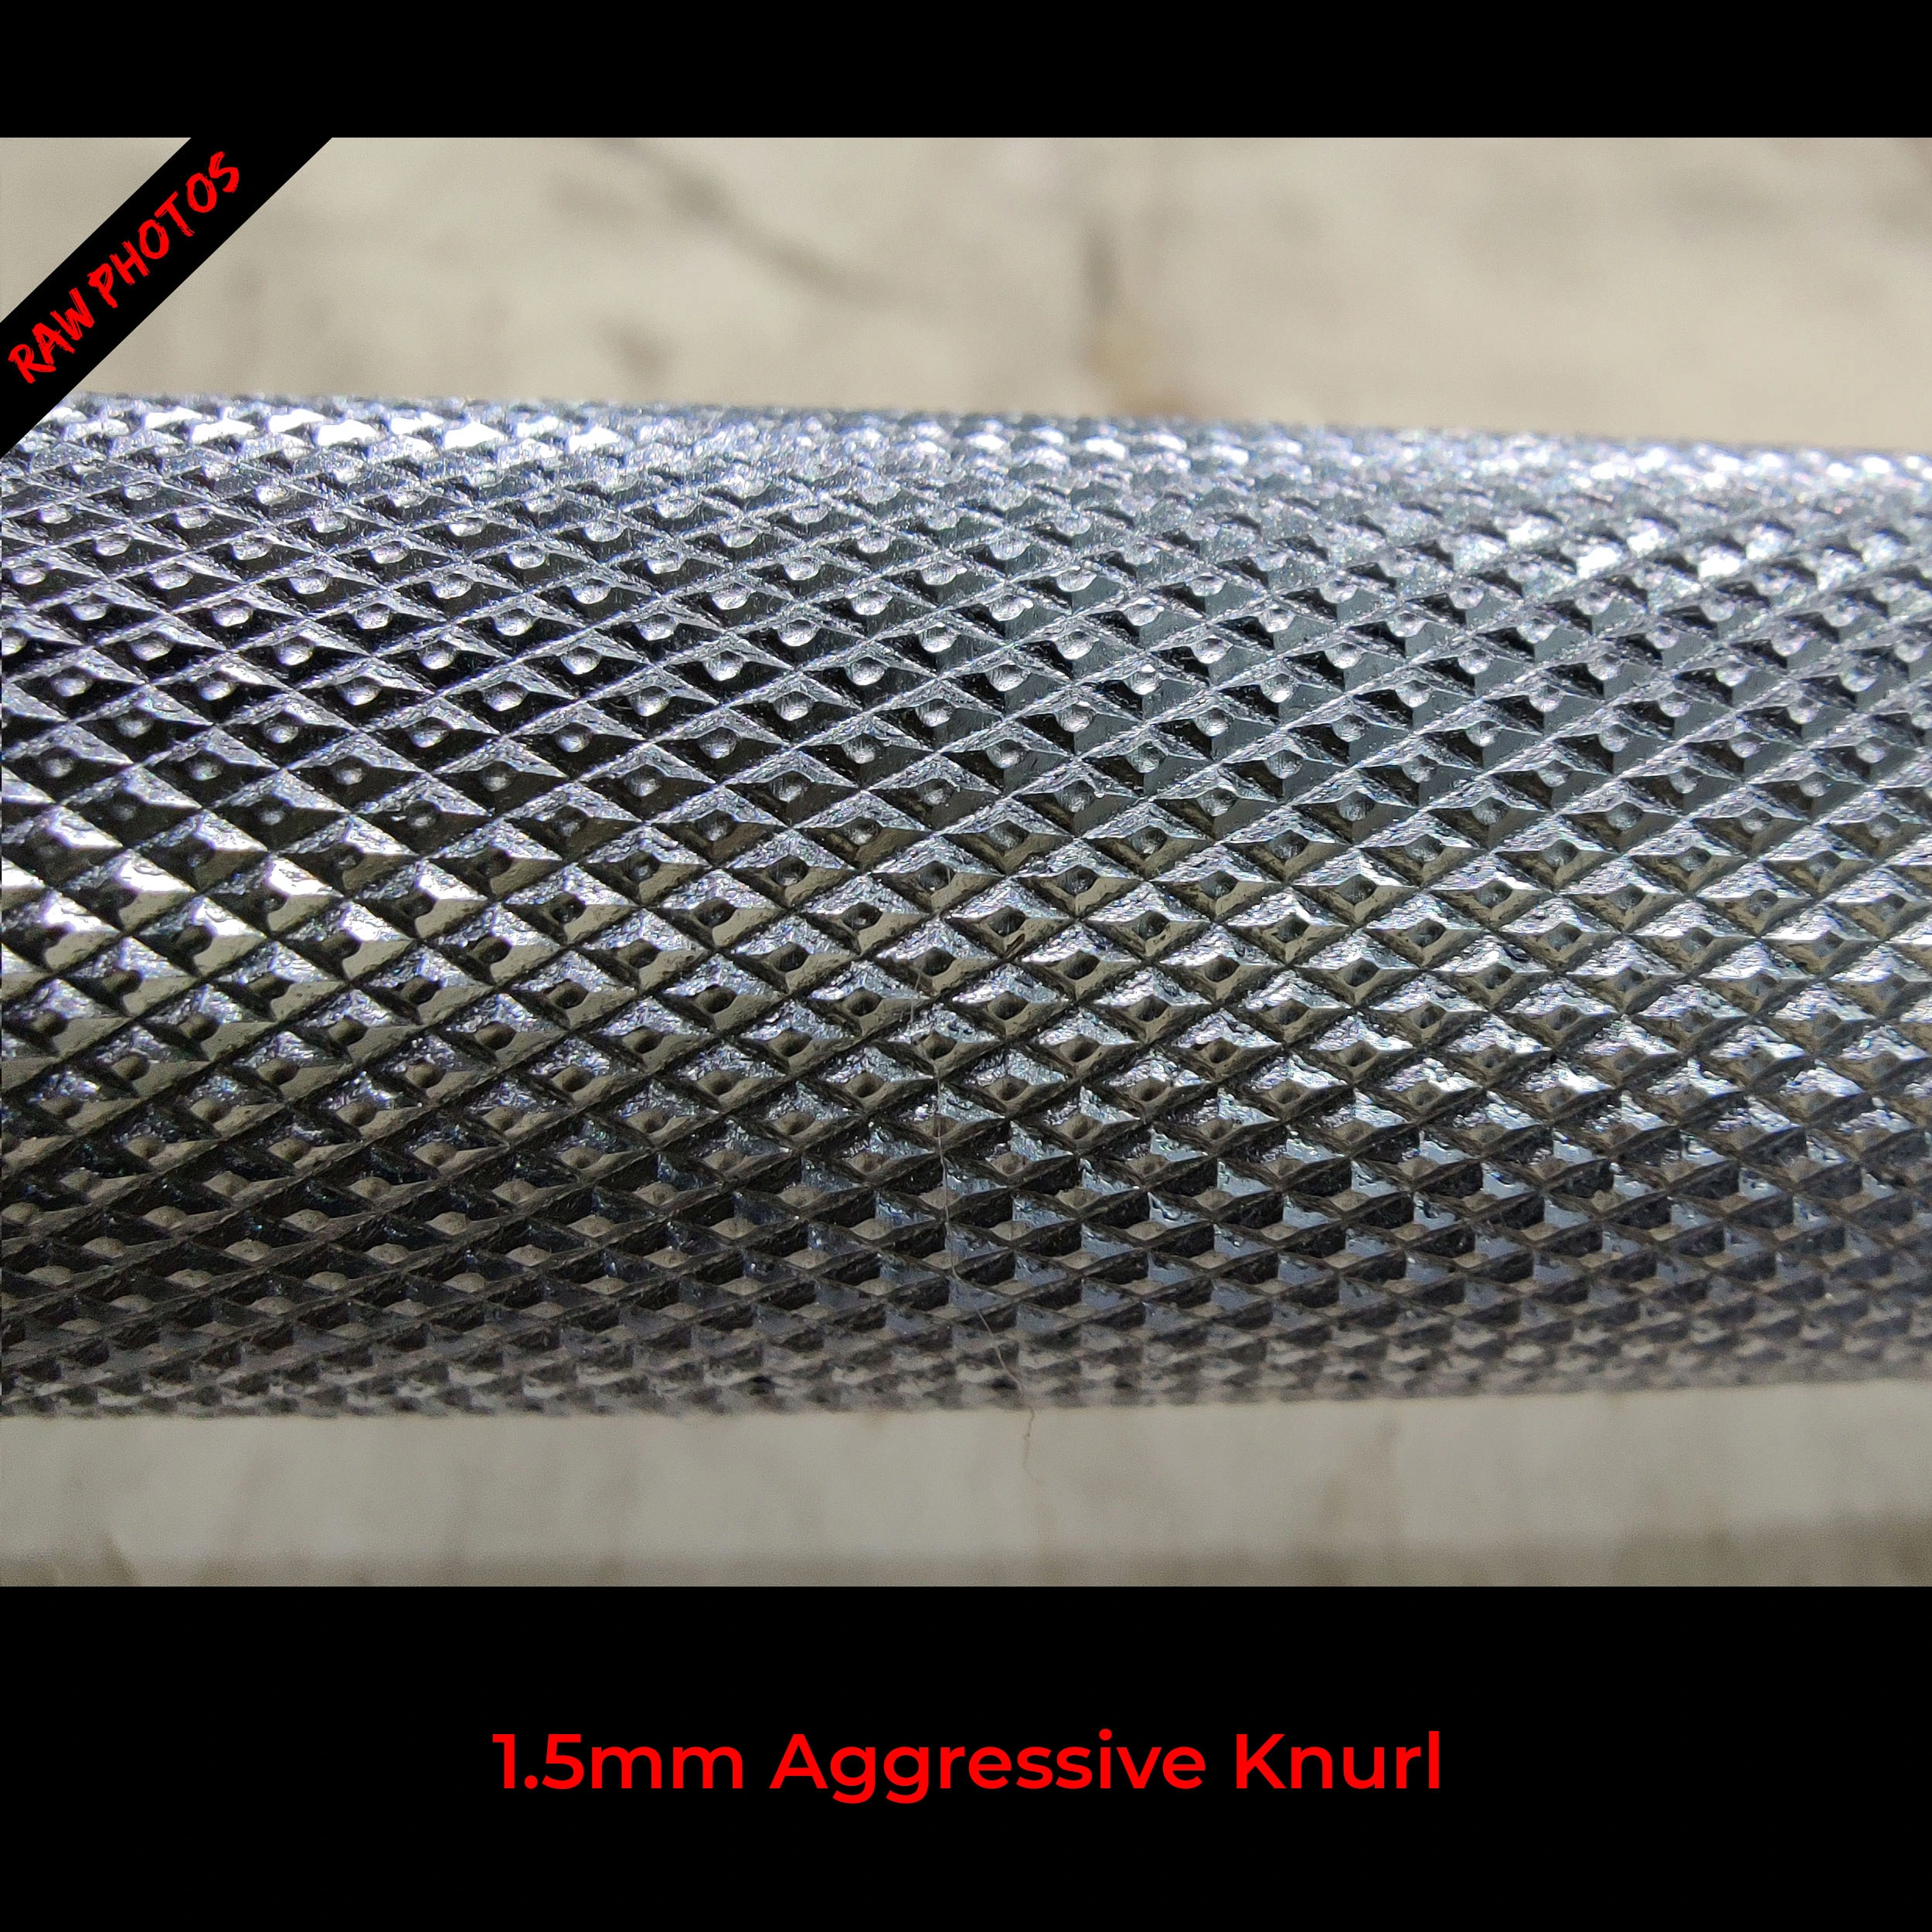 1.5 mm aggressive knurl on powerlifting bar